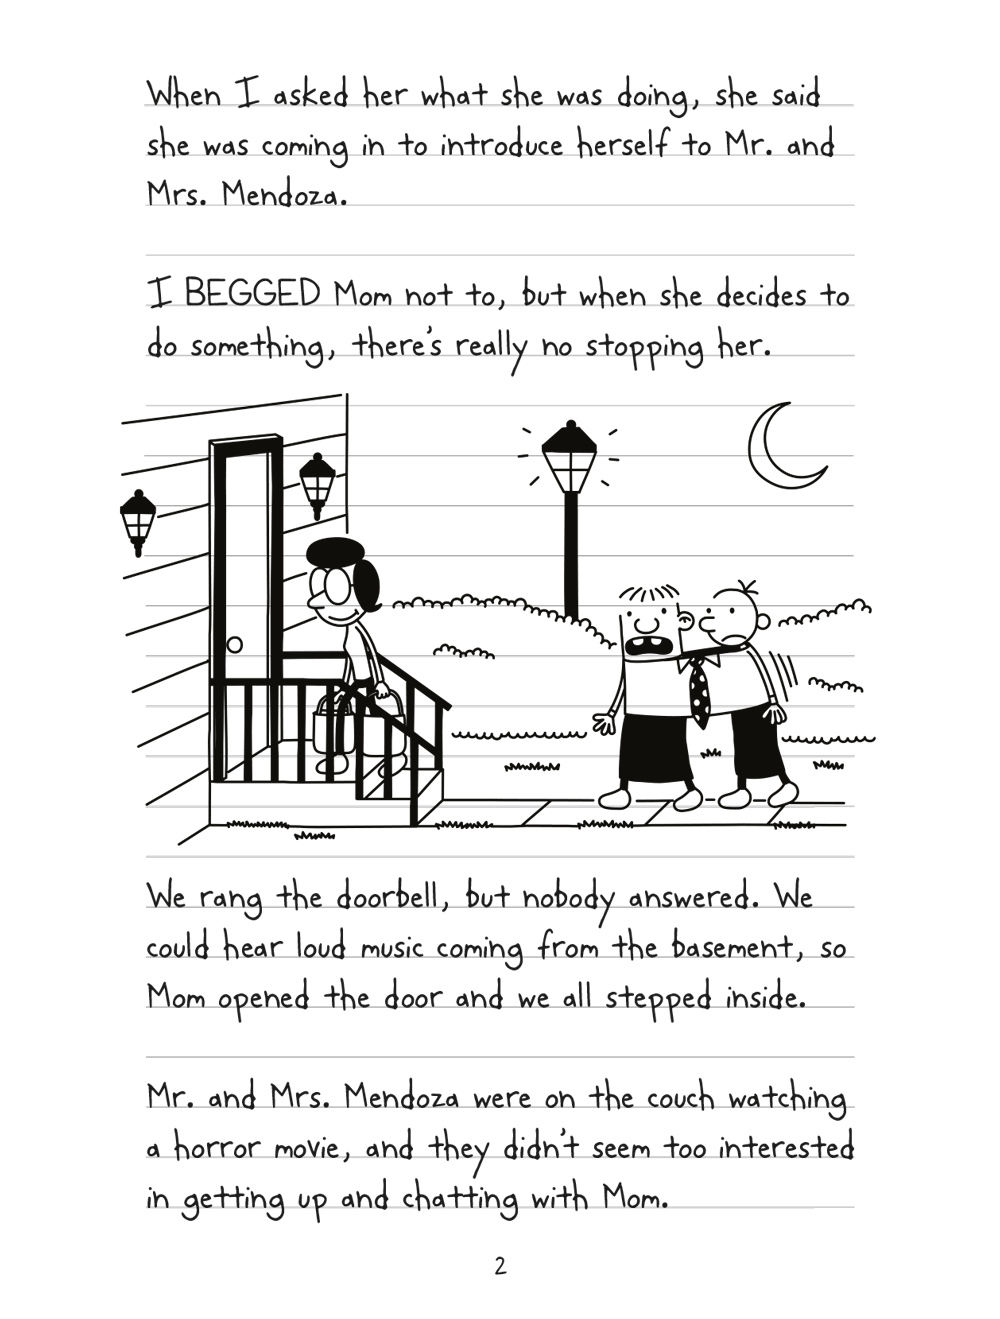 Wimpy Kid Double Down Extract Page 2